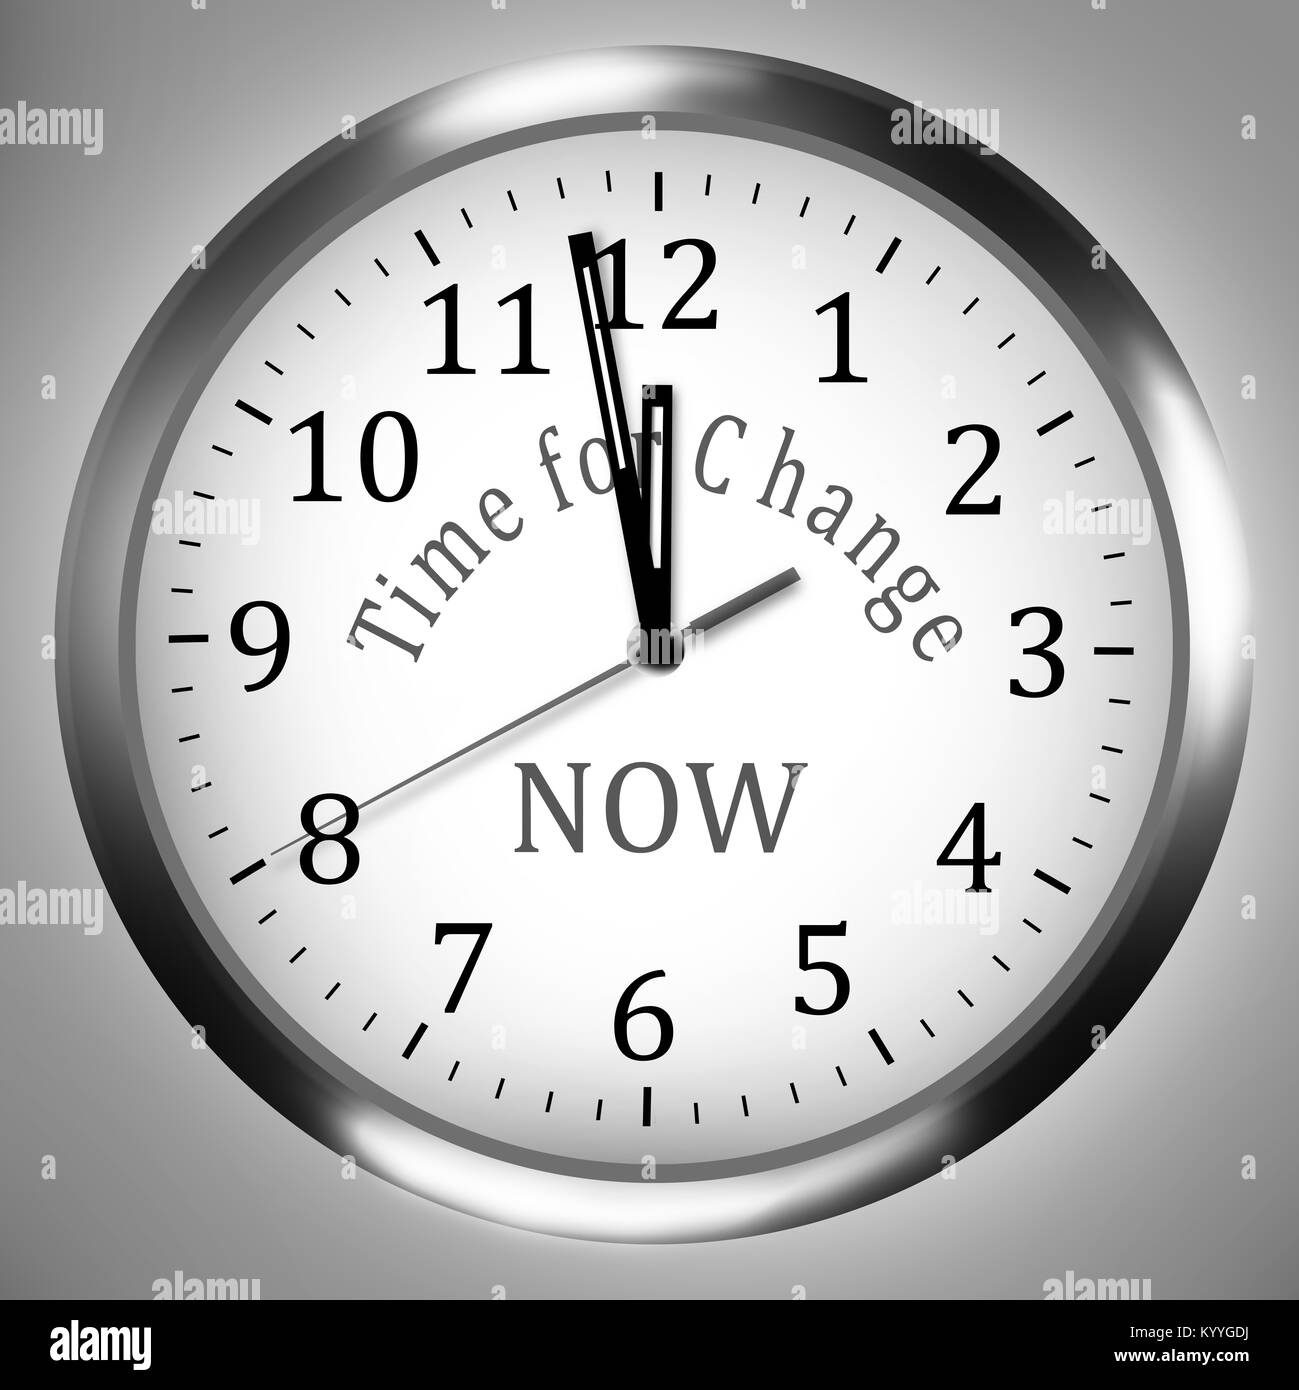 Time For Change Clock Business Ilustration Idea Concept Stock Photo Alamy